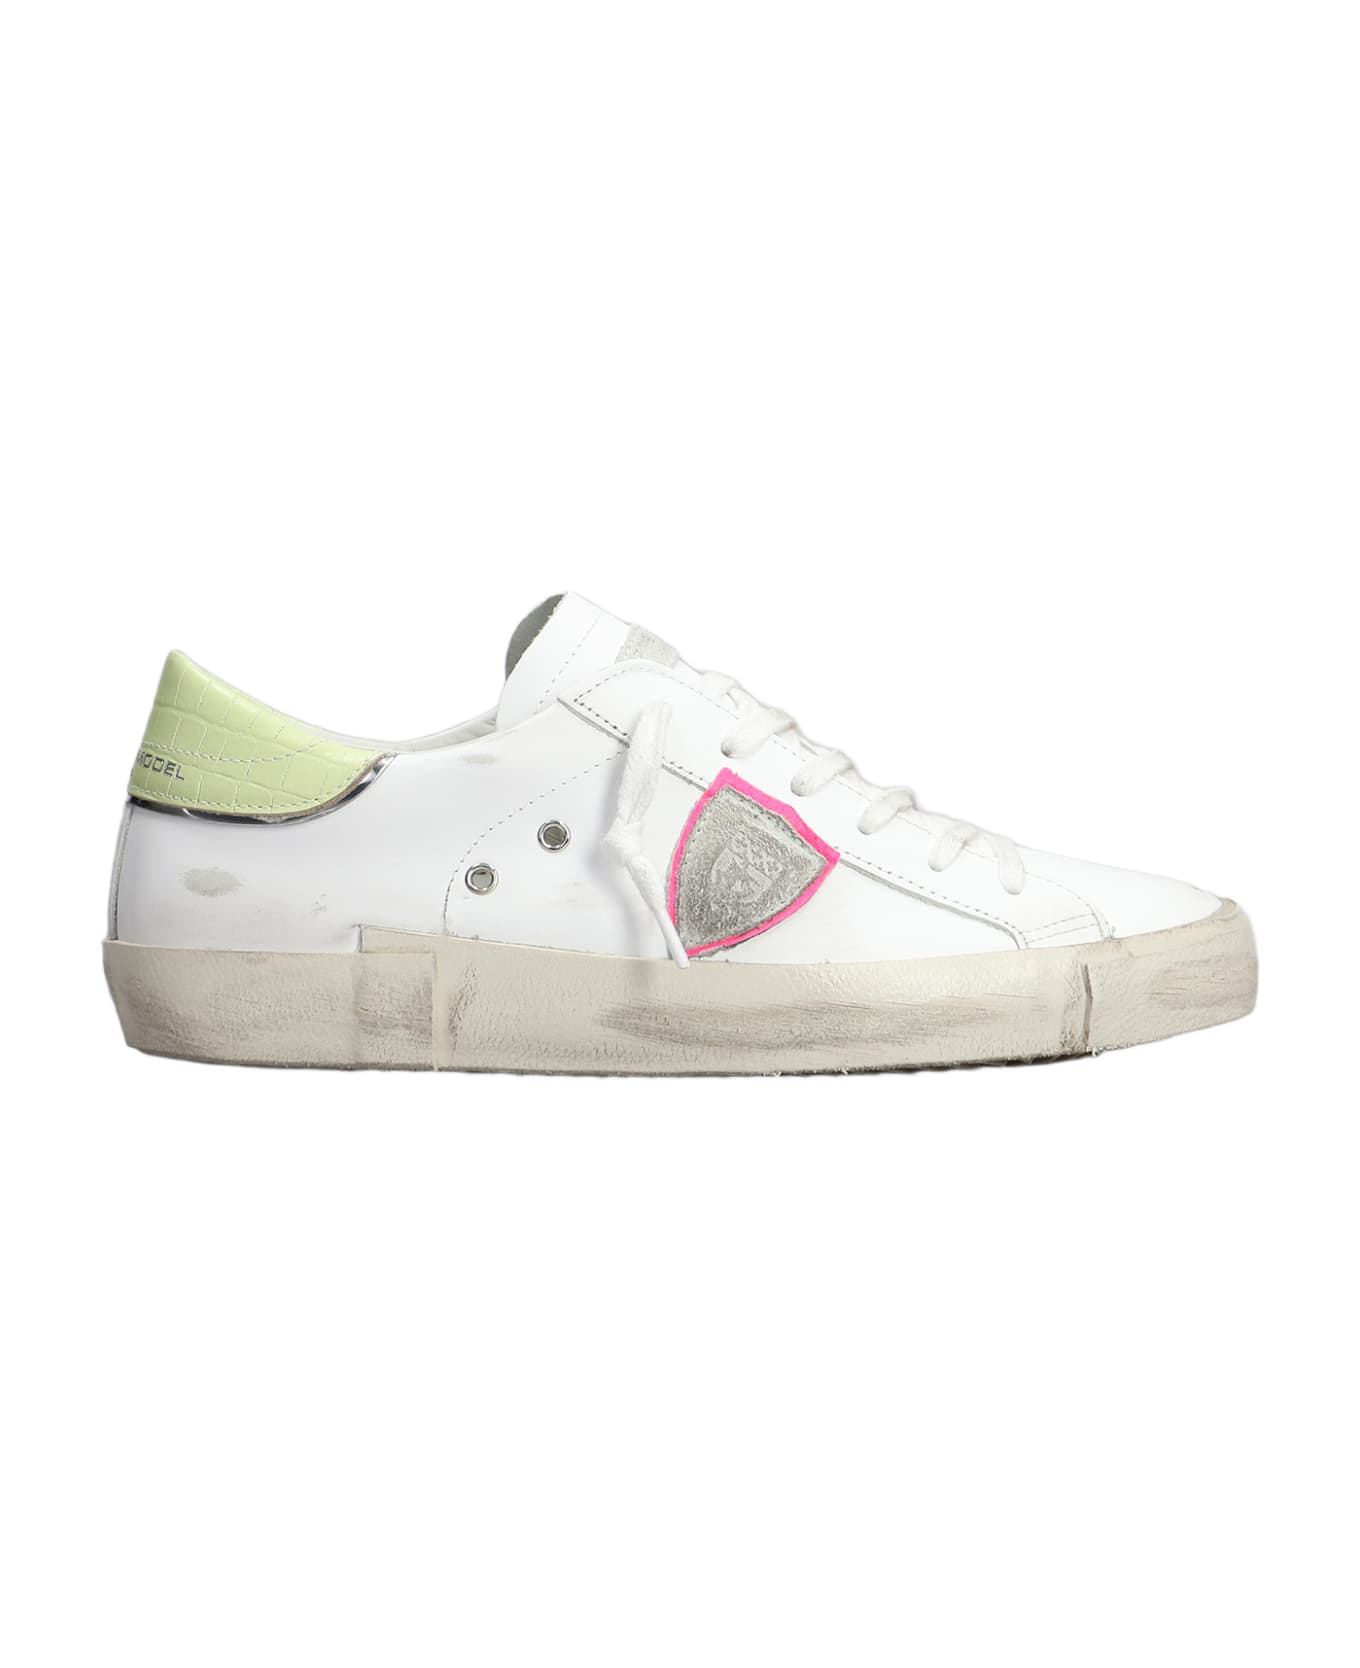 Philippe Model Prsx Low Sneakers In White Leather - white スニーカー